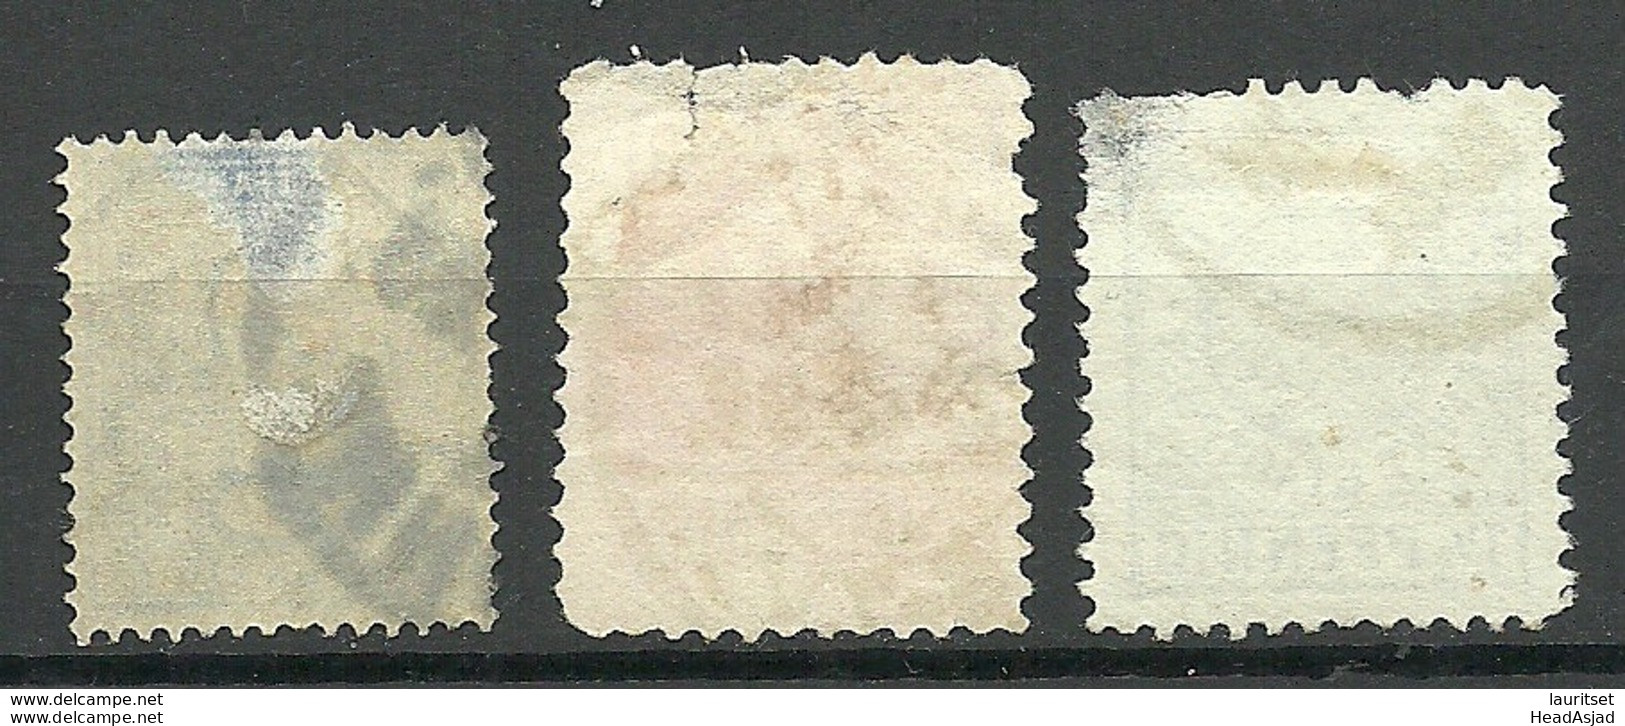 GERMANY Ca 1890 Privater Stadtpost Private Local City Post Courier, 3 Stamps NB! FAULTS! - Correos Privados & Locales